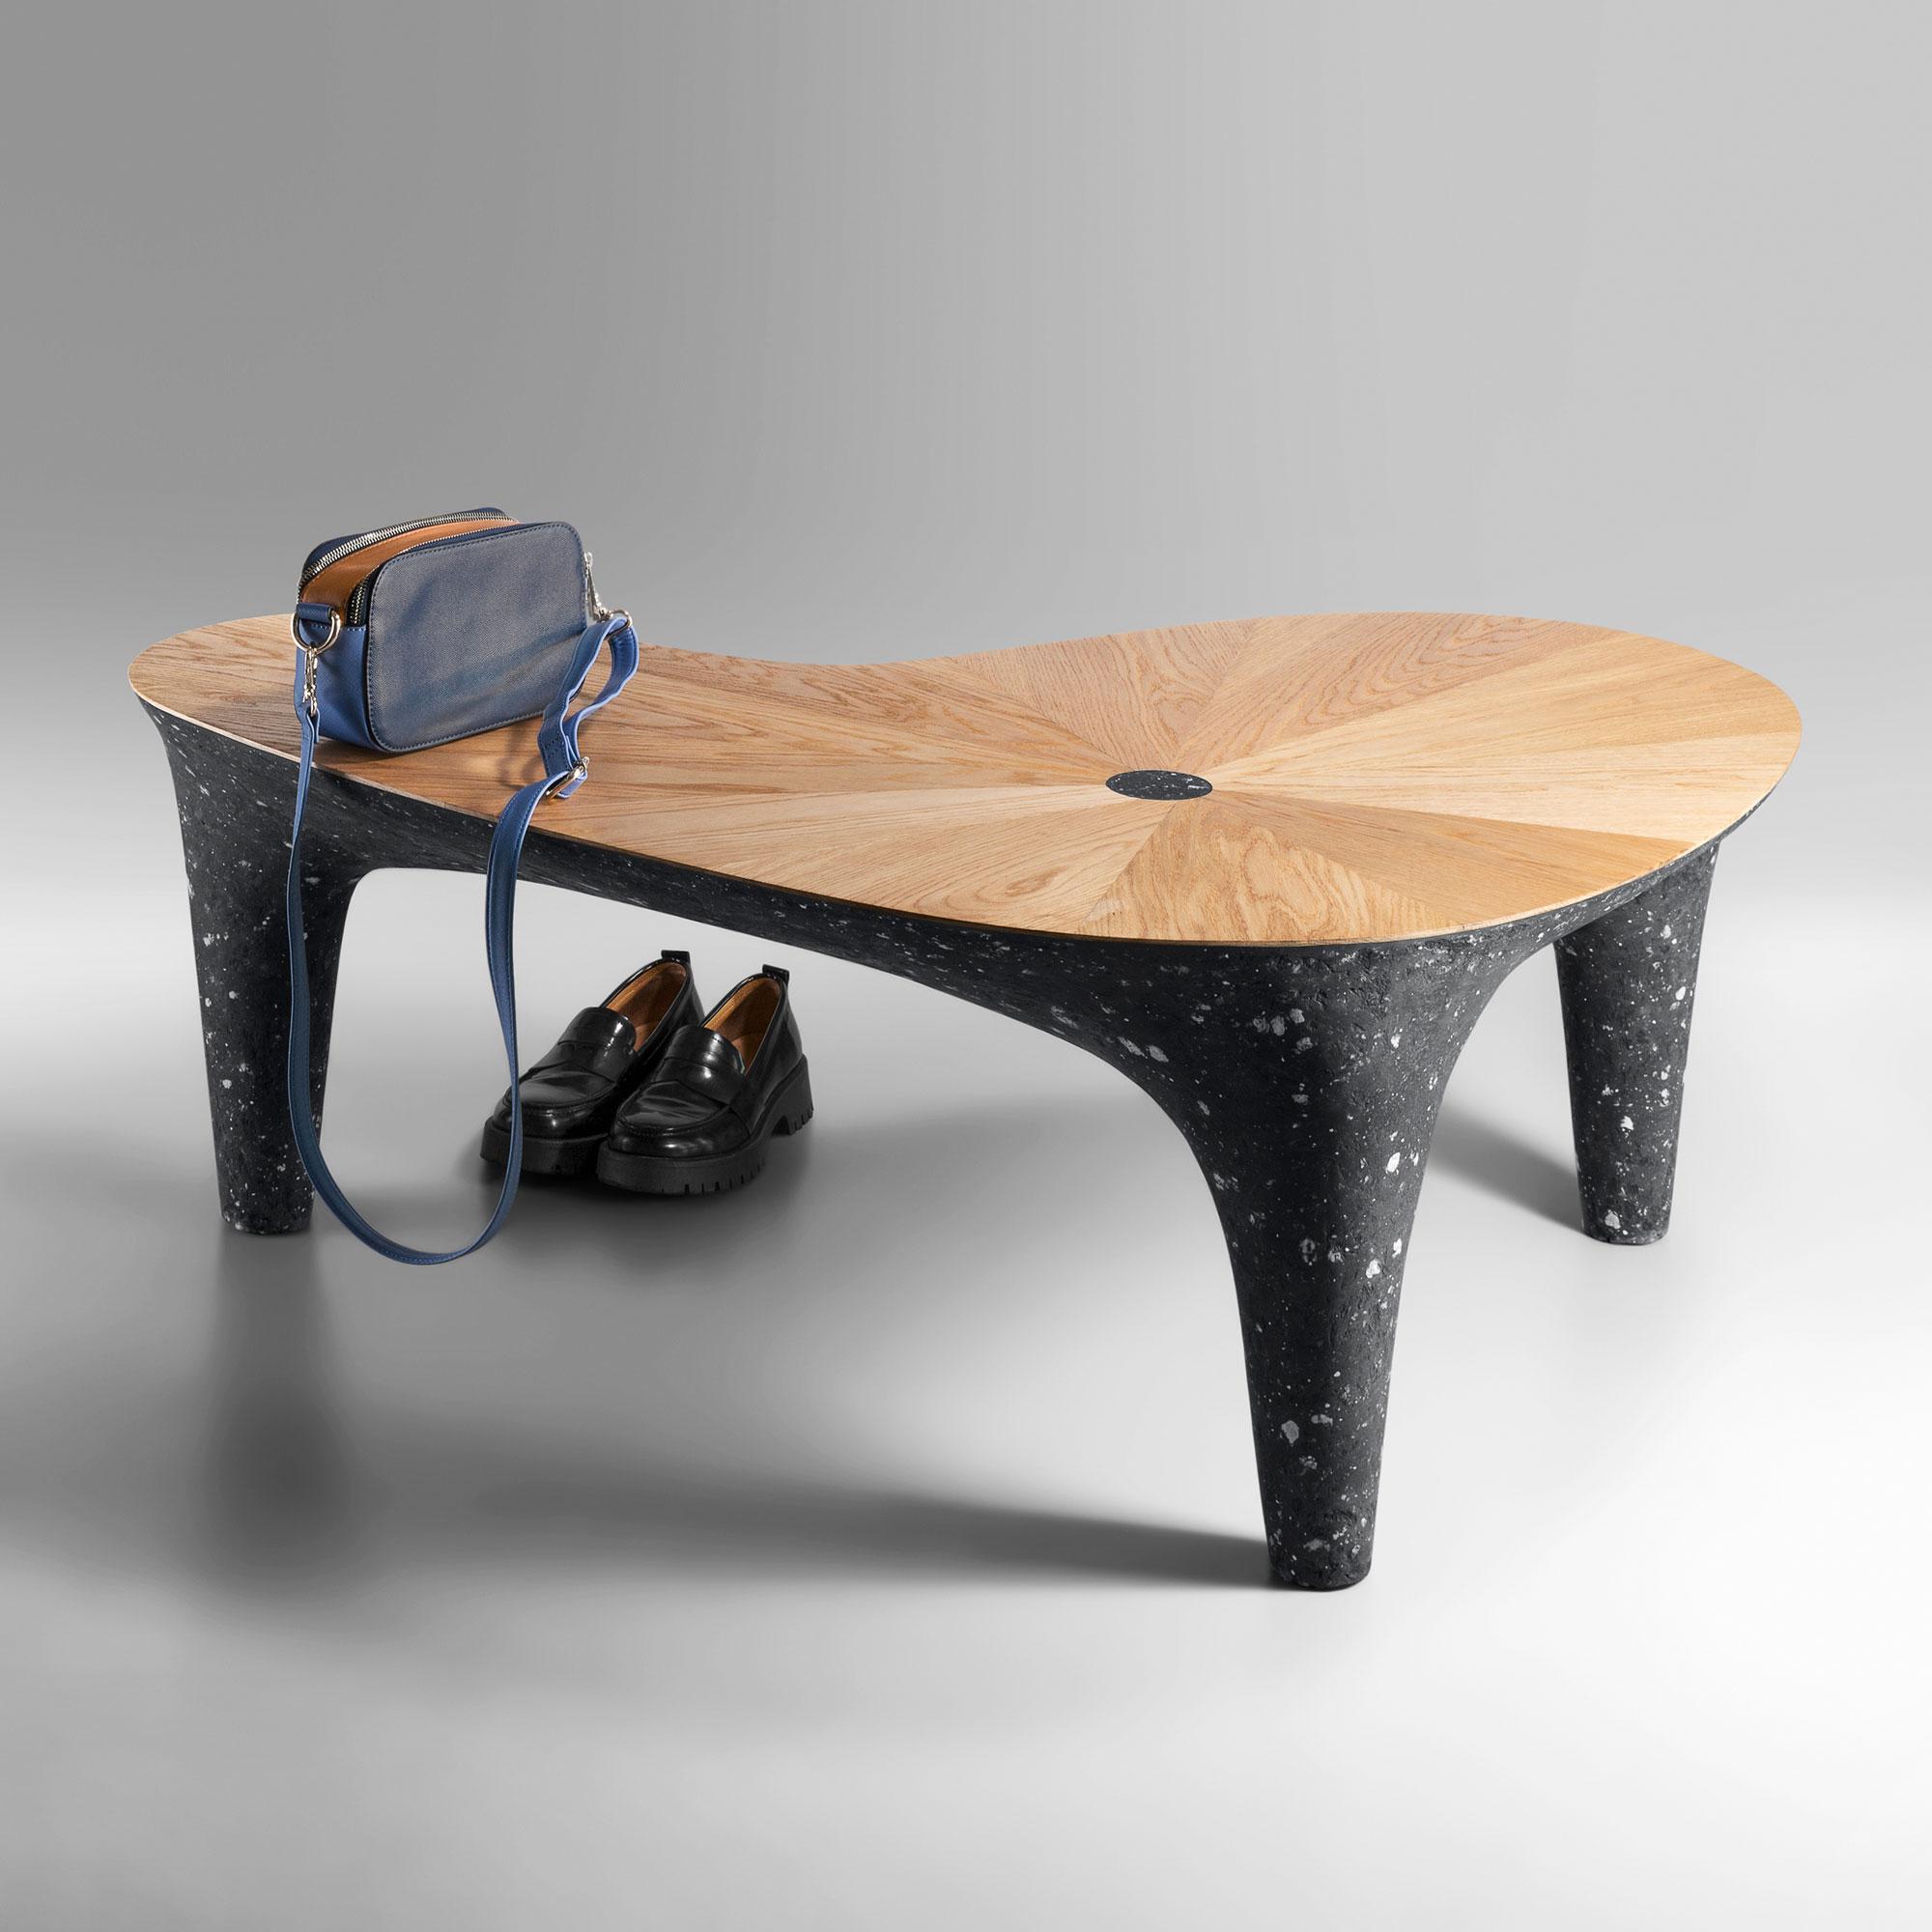 Modern Black Concrete Bench, Natural Oak Tabletop by Donatas Žukauskas In New Condition For Sale In Rudamina, LT